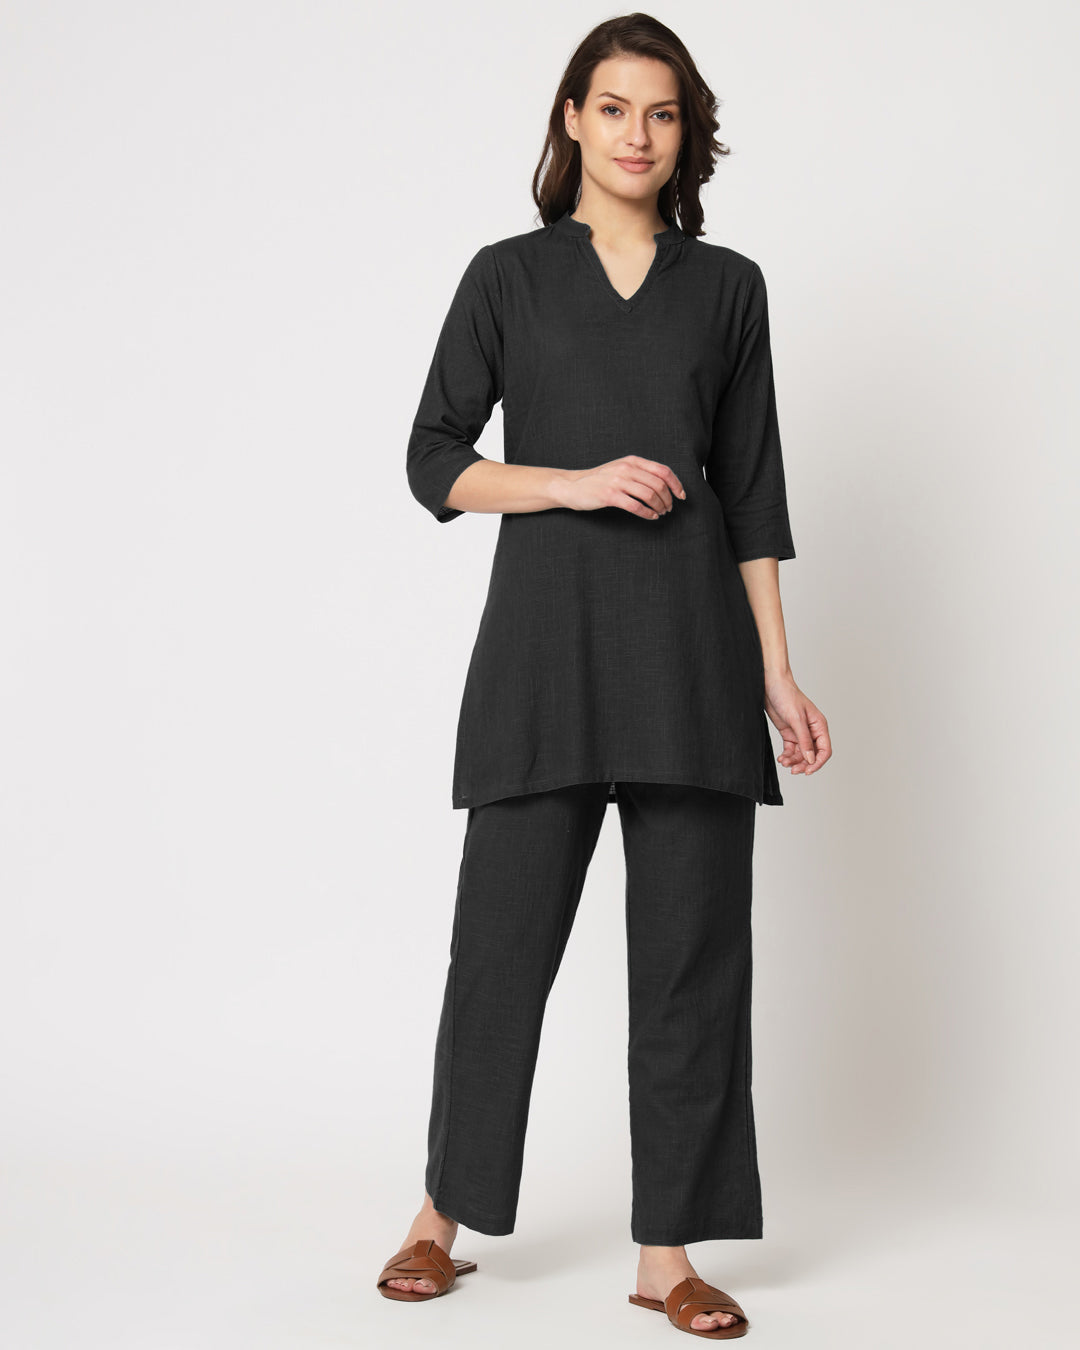 Classic Black Collar Neck Mid Length Solid Kurta (Without Bottoms)